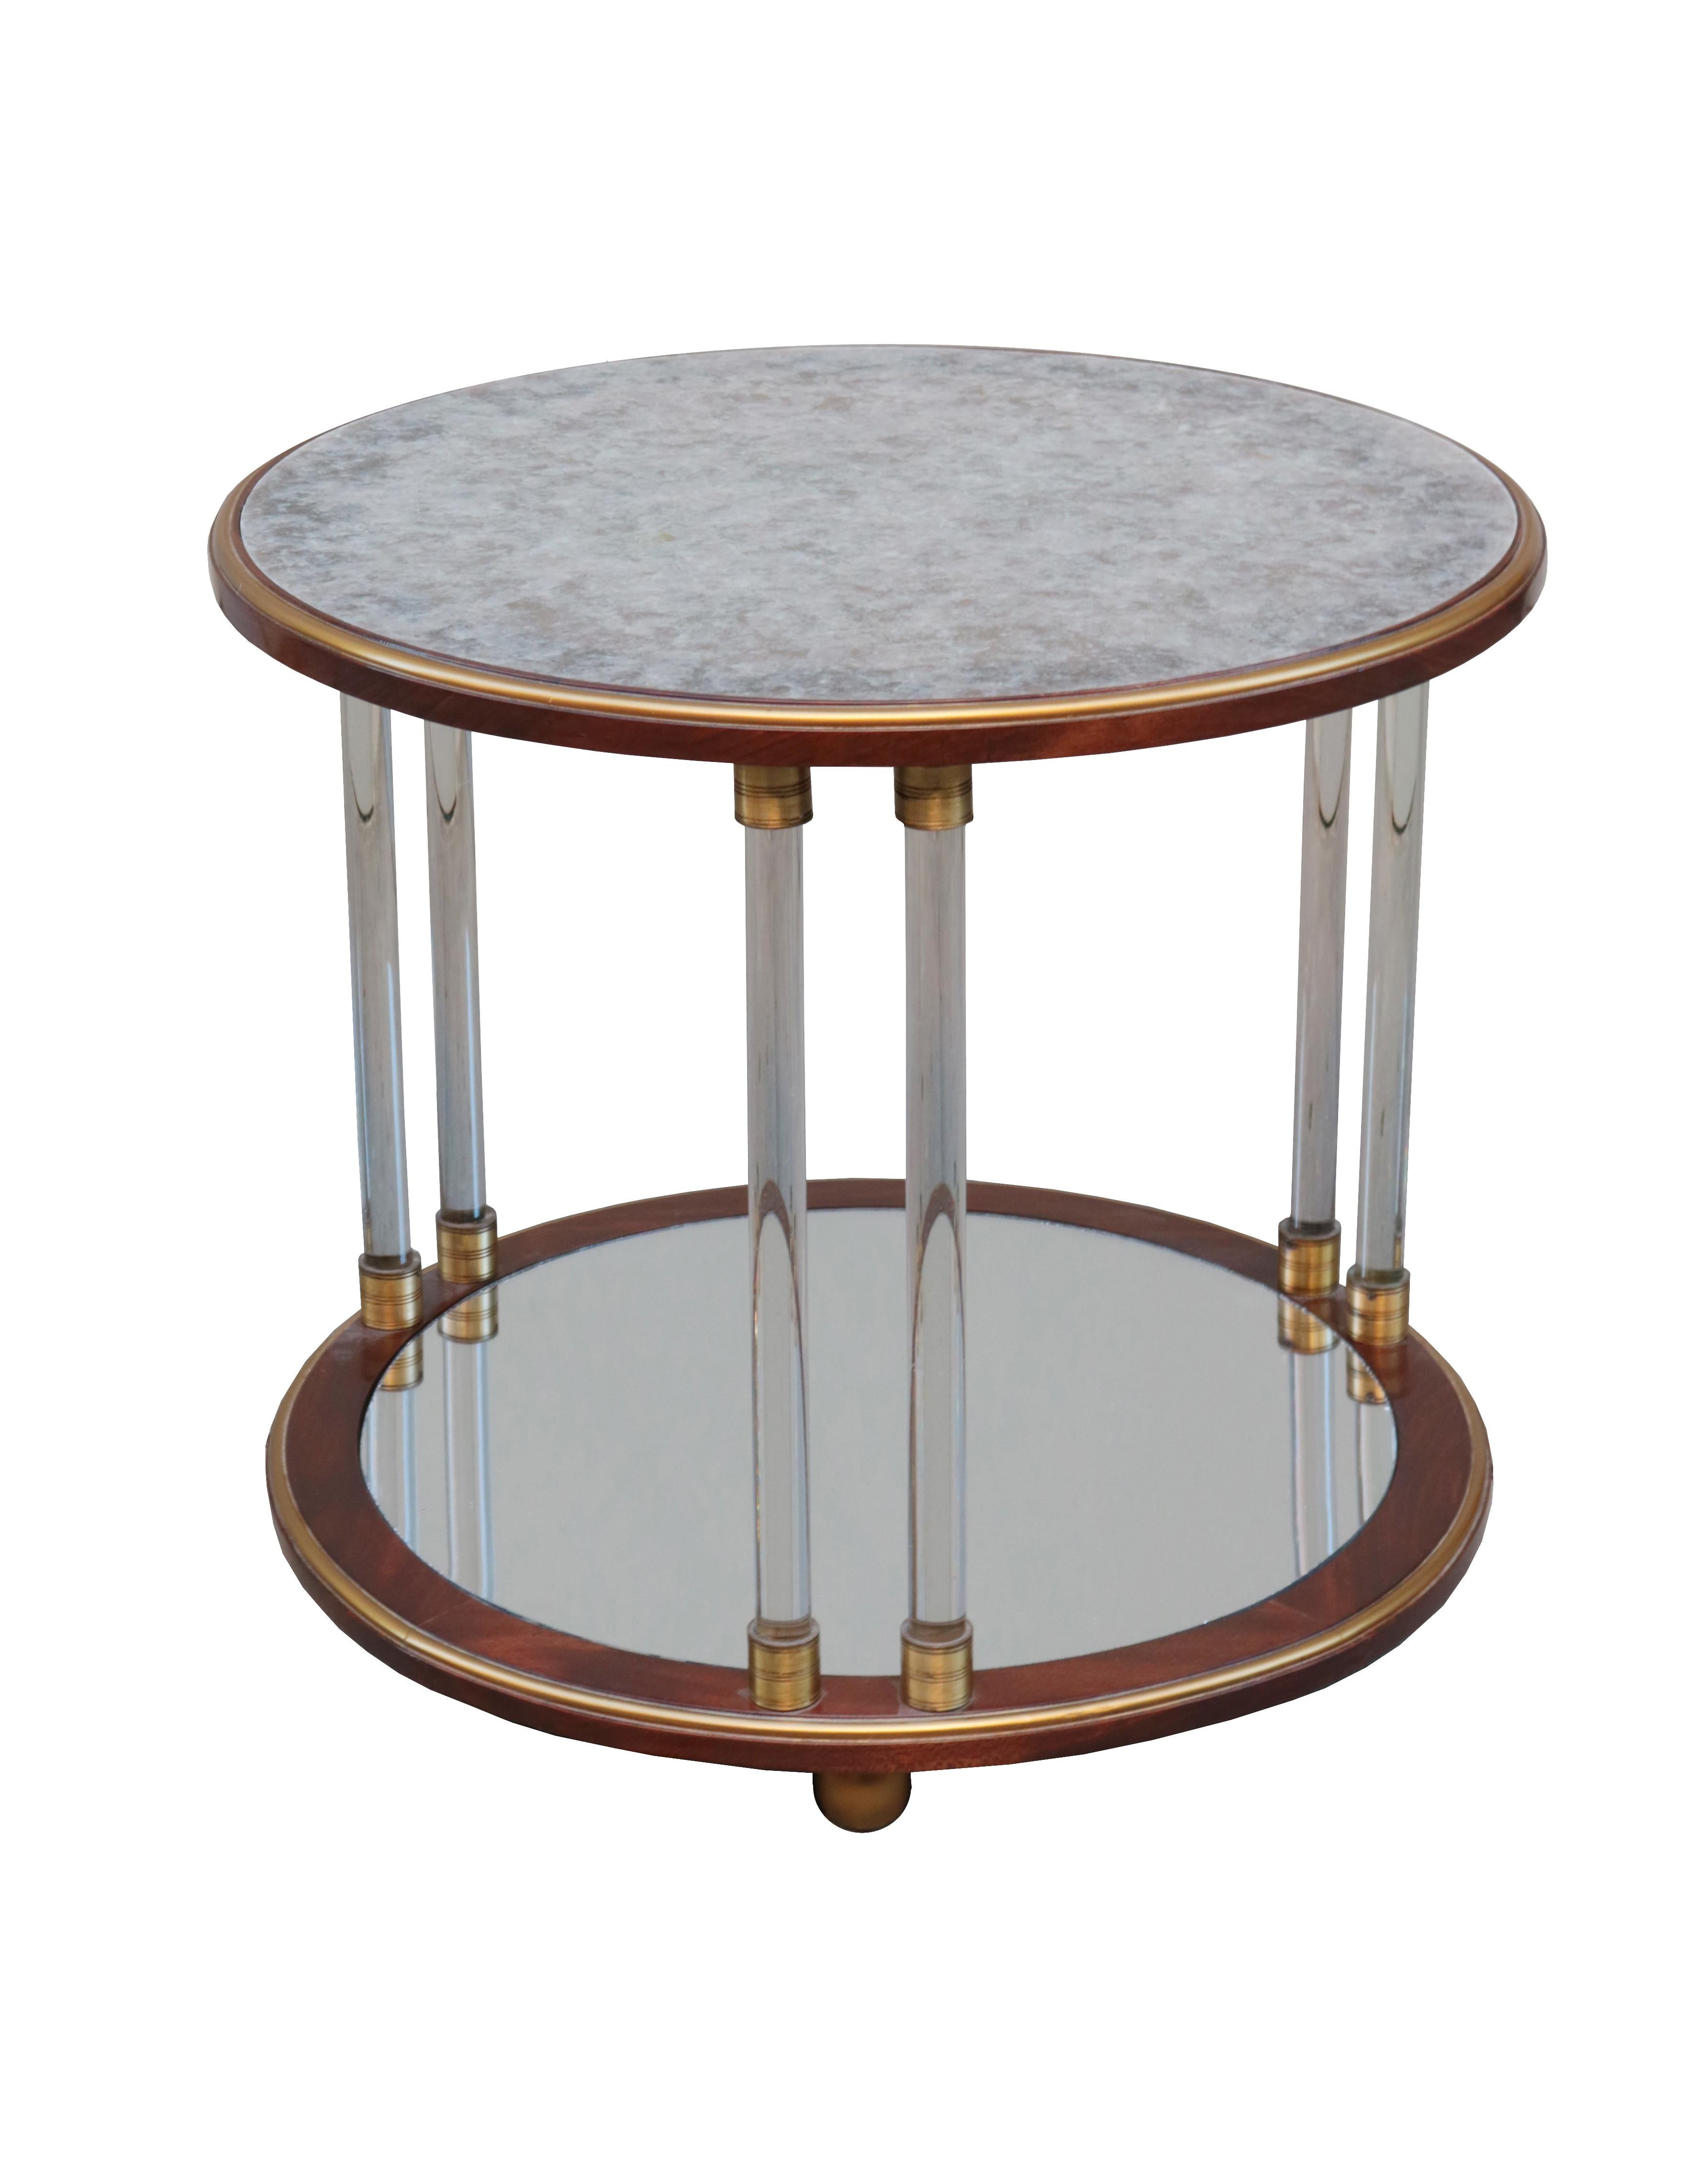 A pair of Art Deco round two-tier side tables.
Mahogany with
A pair of Art Deco two-tier round side tables.
Mahogany with mica tops, glass legs,
patinated brass details, giltwood feet
and mirrored bottom tier.


 